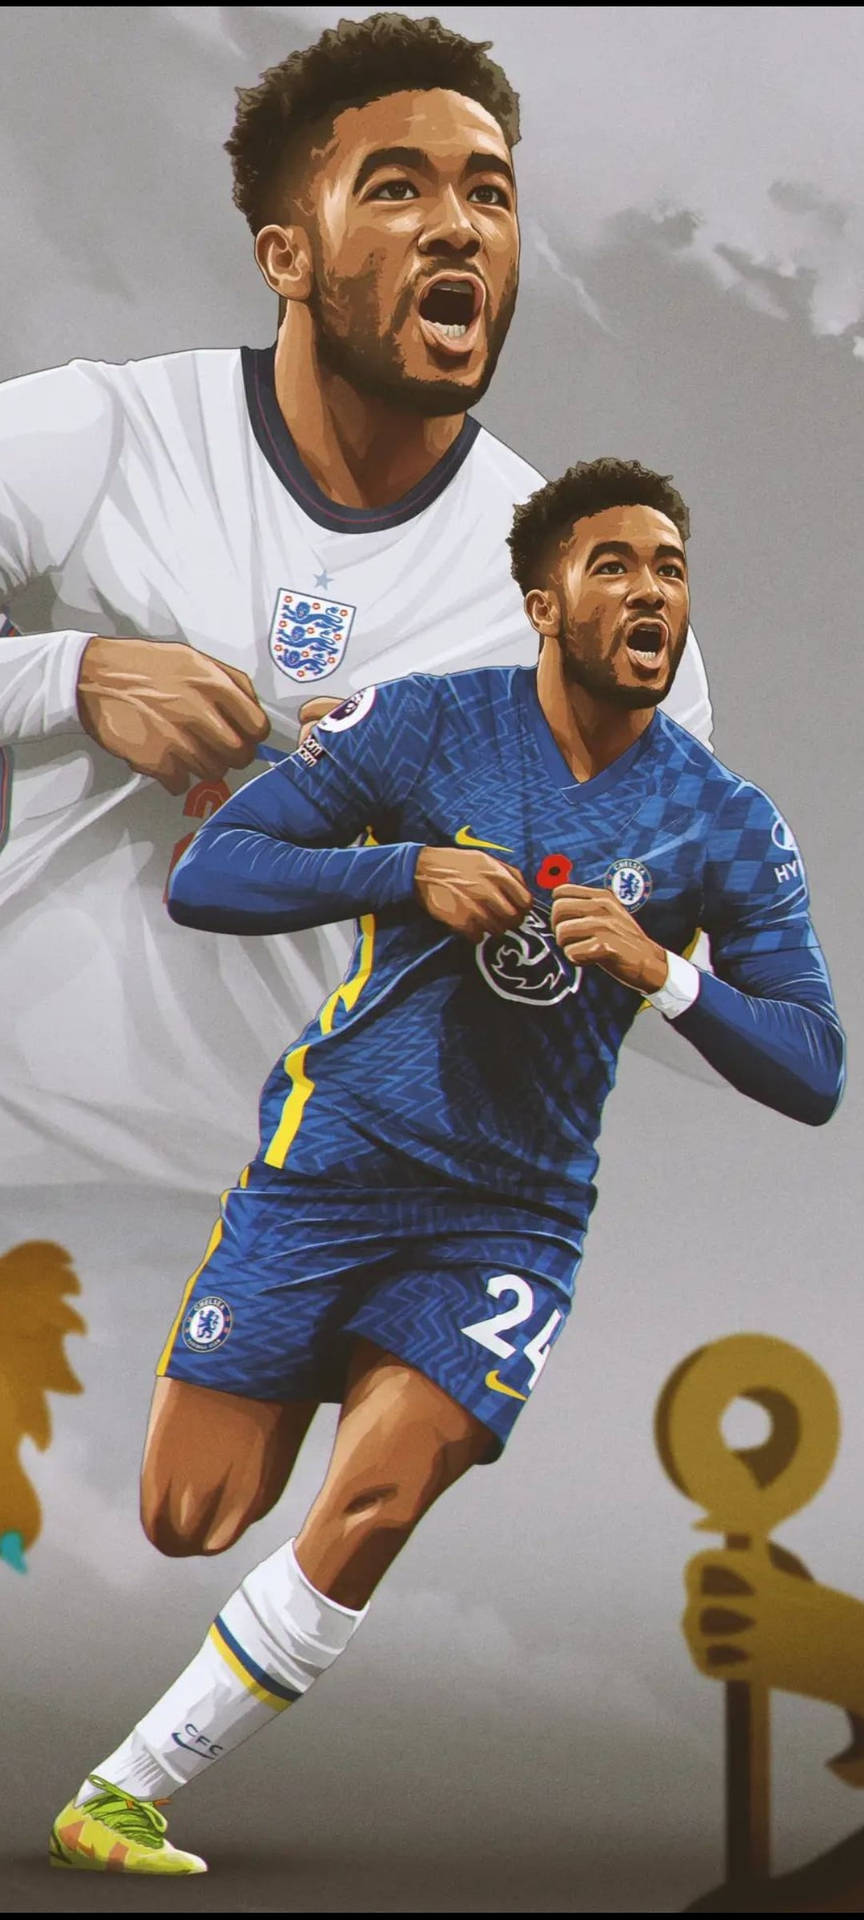 Reece James in Action on the Football Field Wallpaper